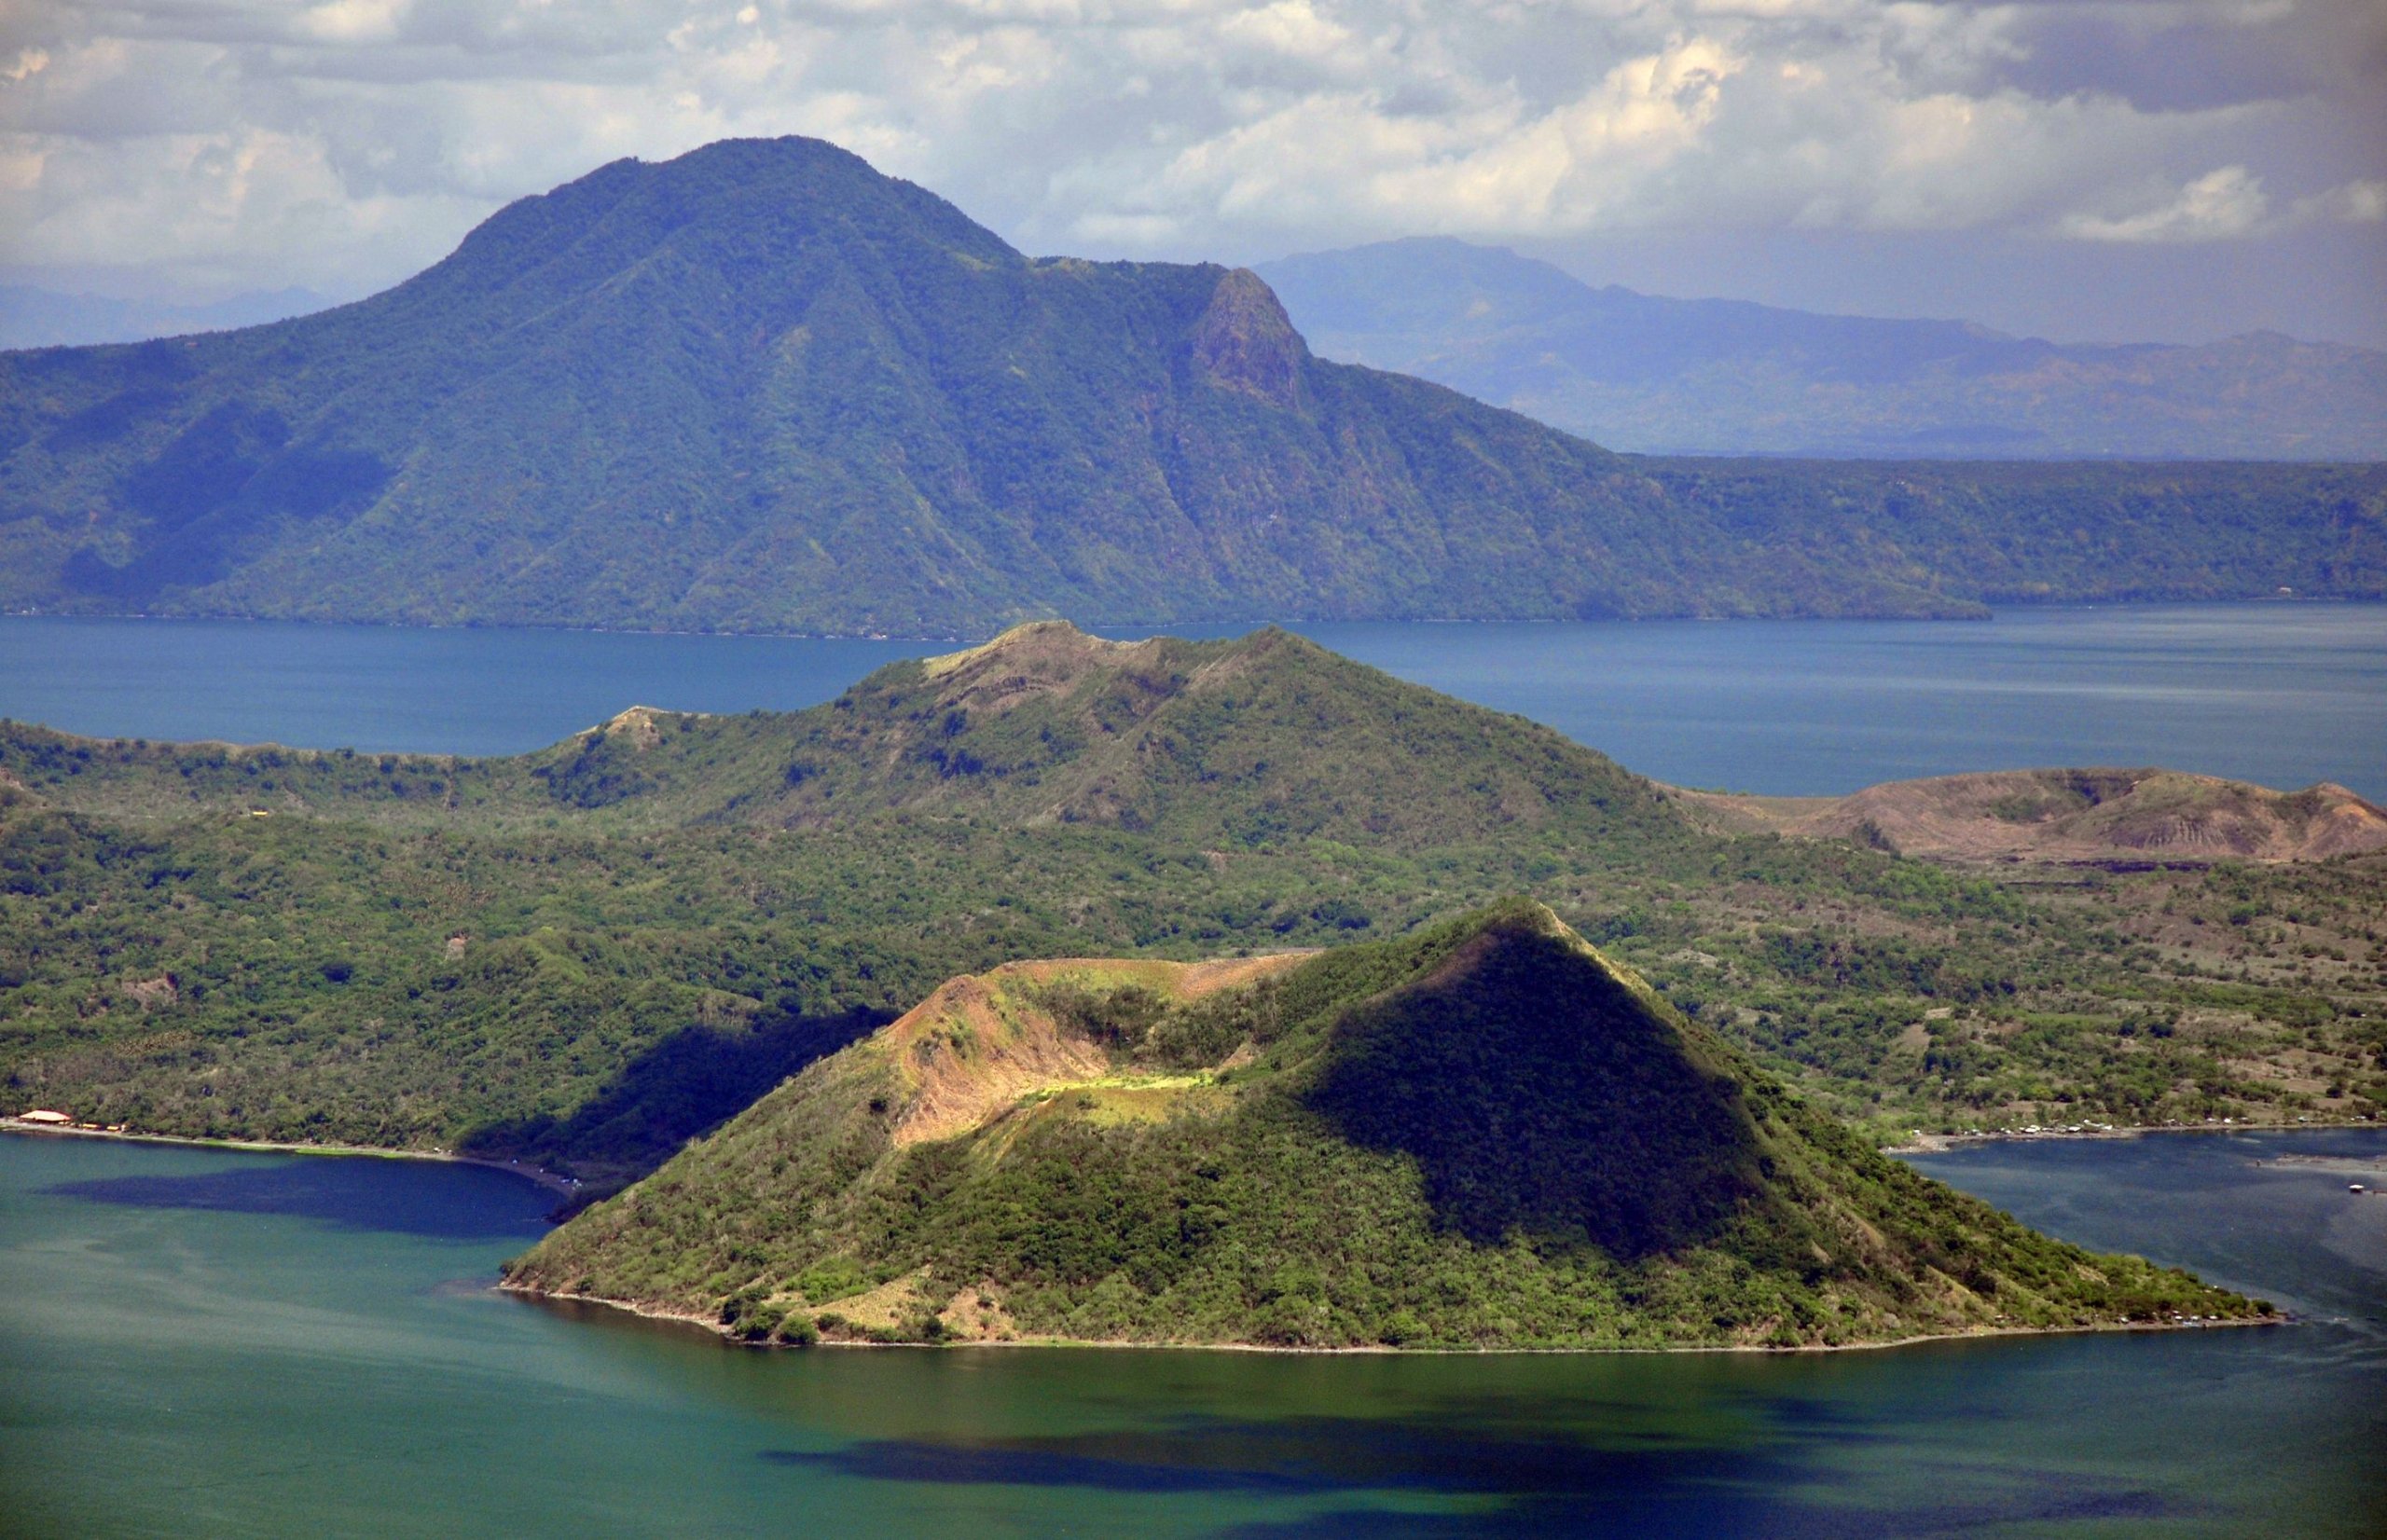 Facts about taal Volcano